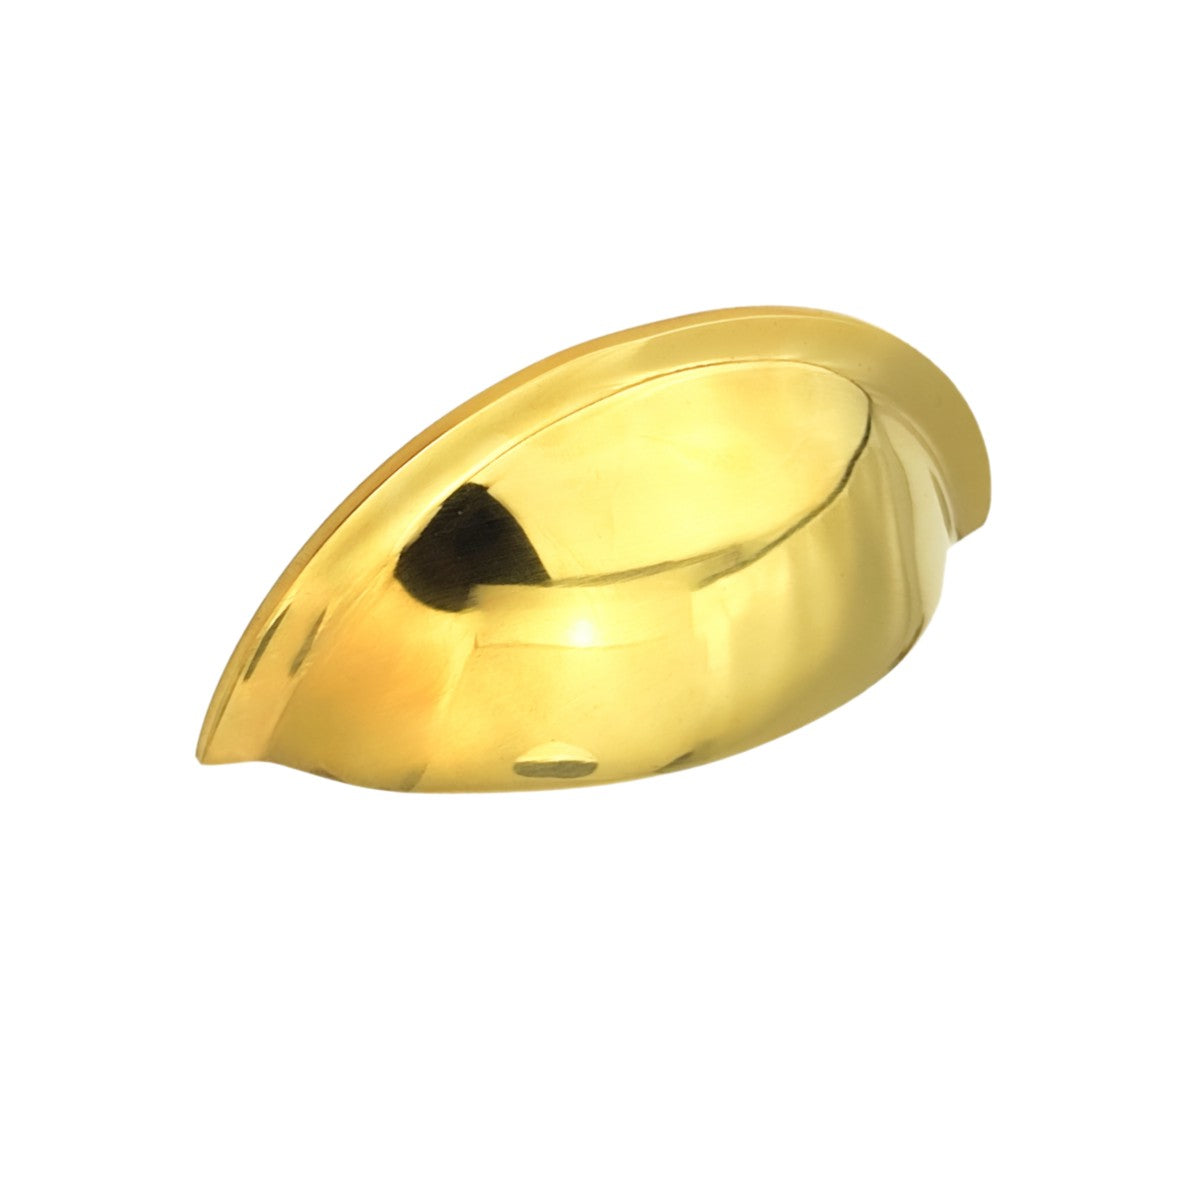 Slim Cup Handle Small Polished Brass Unlacquered